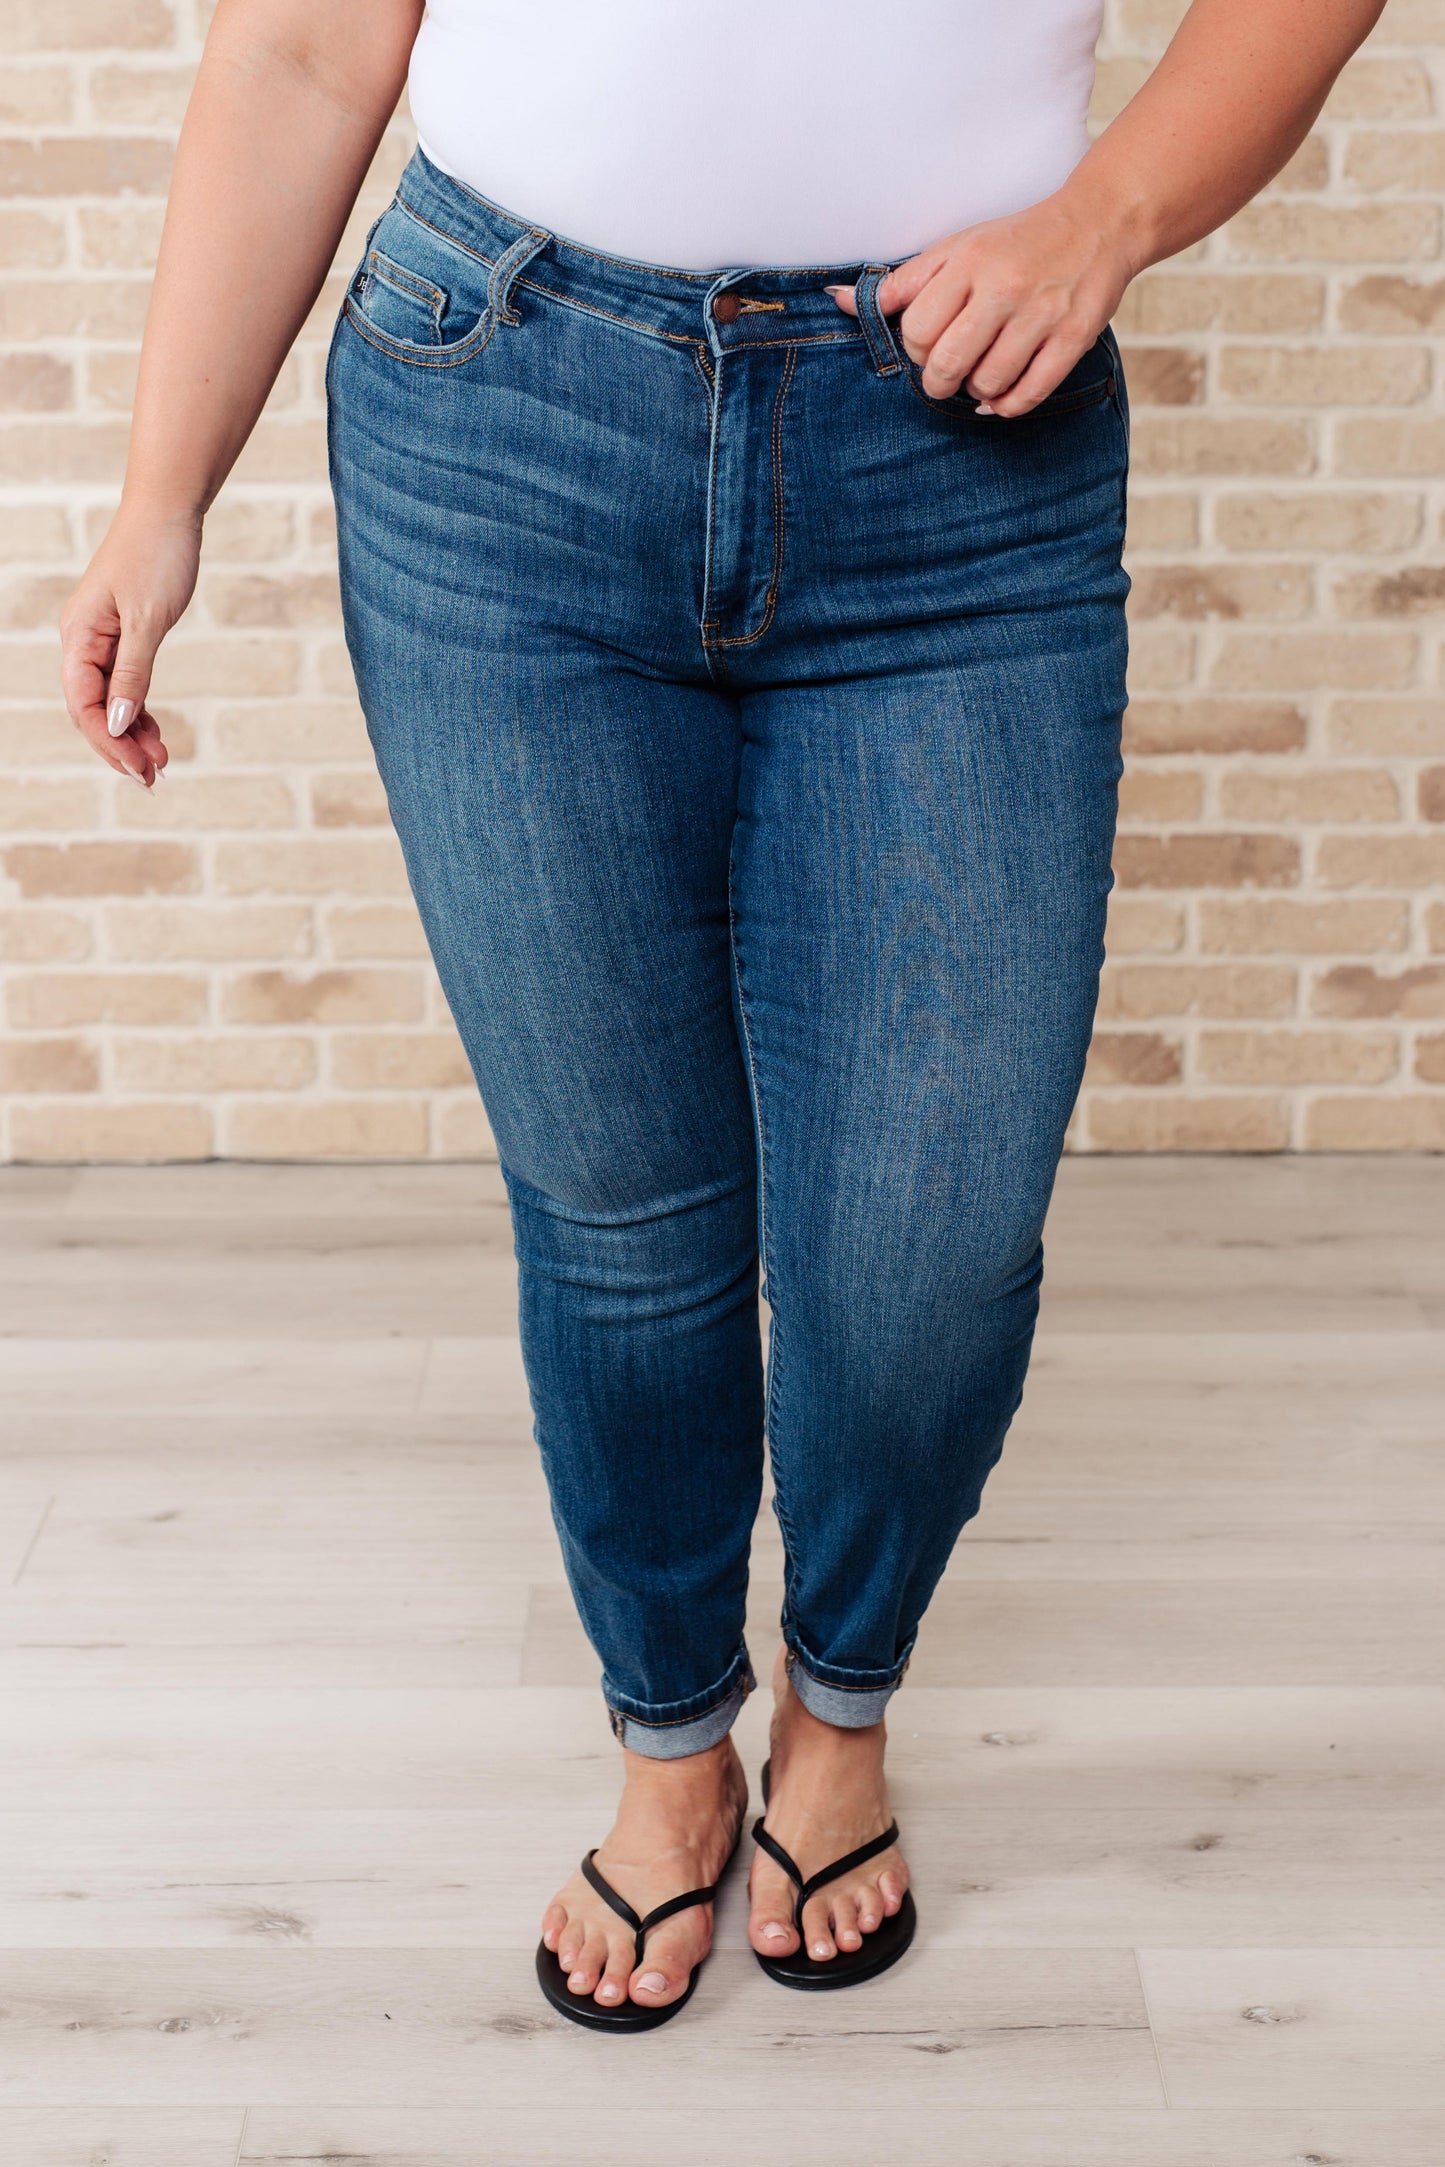 High Rise Skinny Jeans - Judy Blue